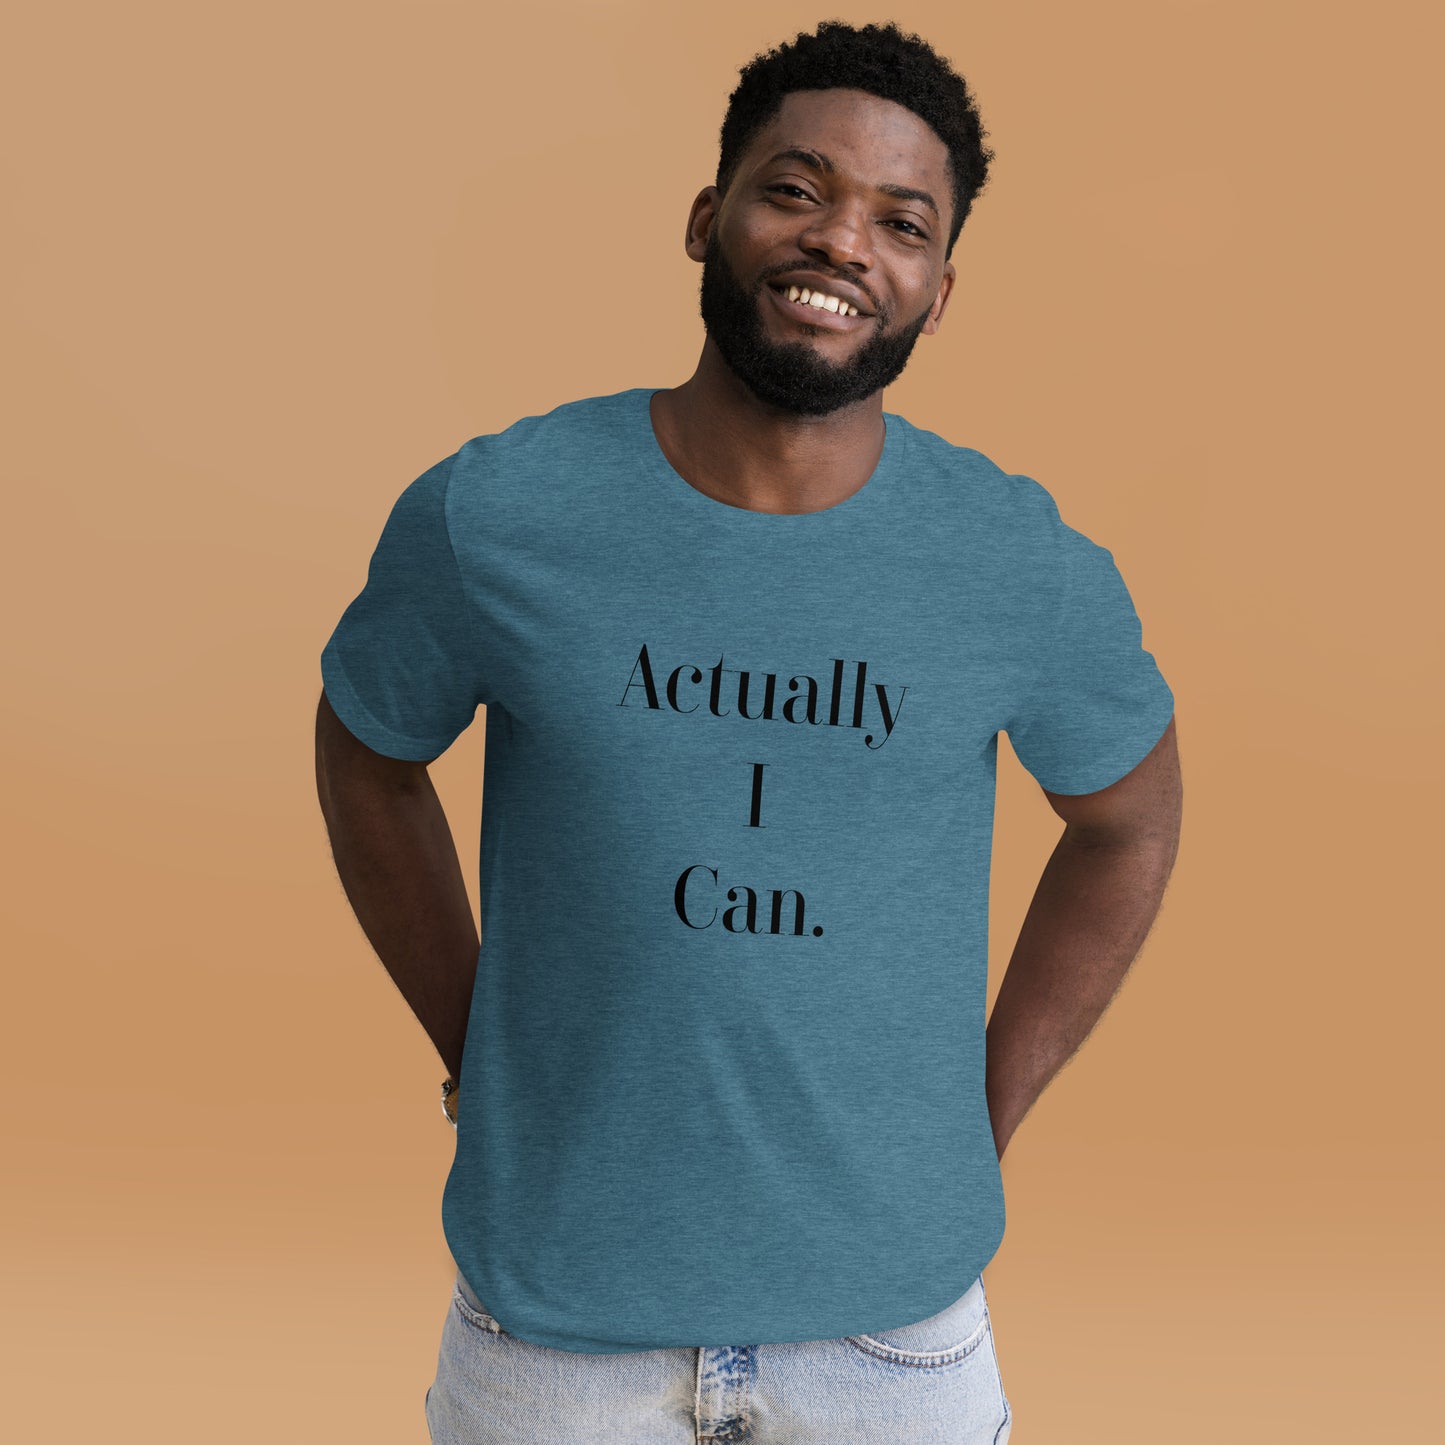 Actually I can T-shirt